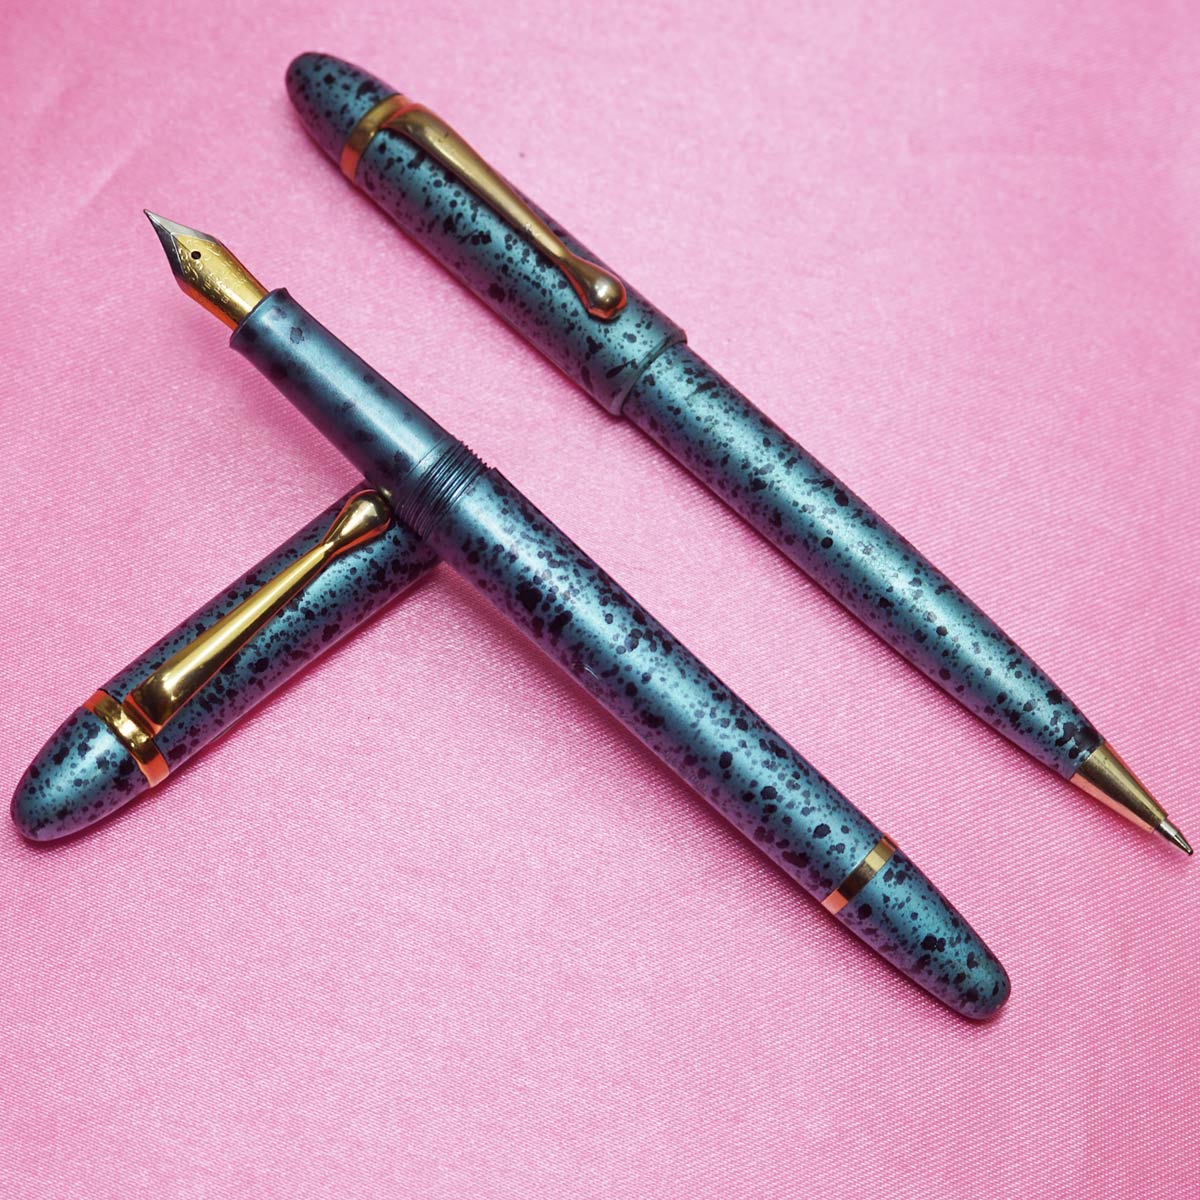 Gama Blue Color Body and Cap with Marble Design No.5 Dual Tone Fine Tipped Nib Eye Dropper Model Fountain Pen and Jotter Ball Pen Set SKU 22221